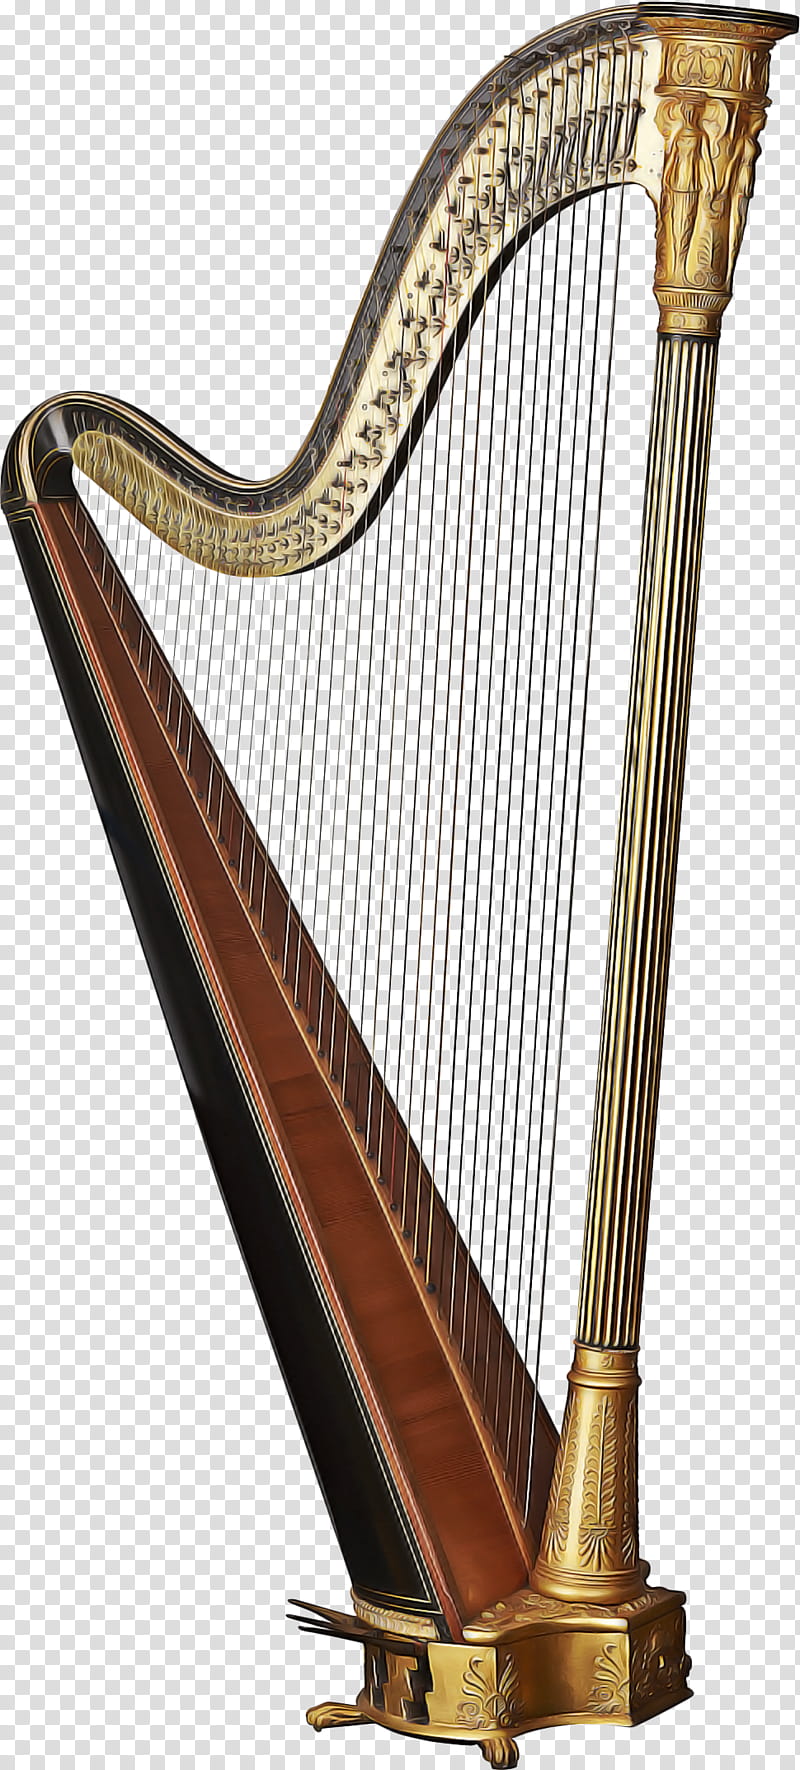 India People, Konghou, Lyre, Harp, Musical Instruments, Indian People, String Instrument, Plucked String Instruments transparent background PNG clipart